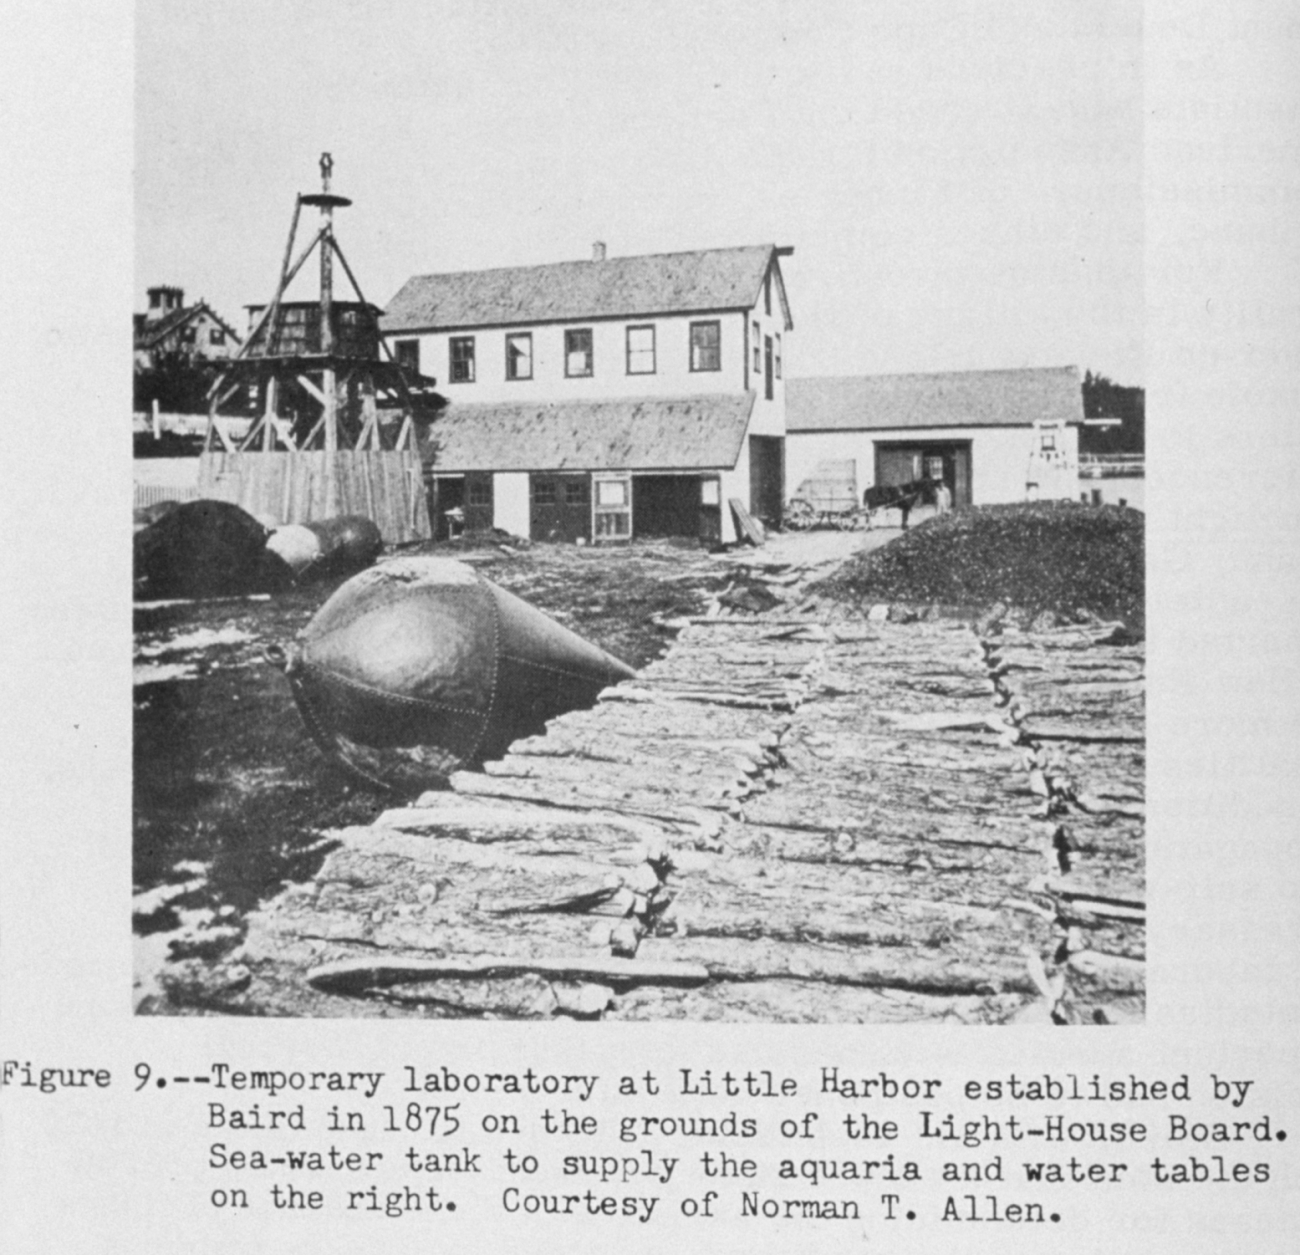 Temporary laboratory at Little Harbor